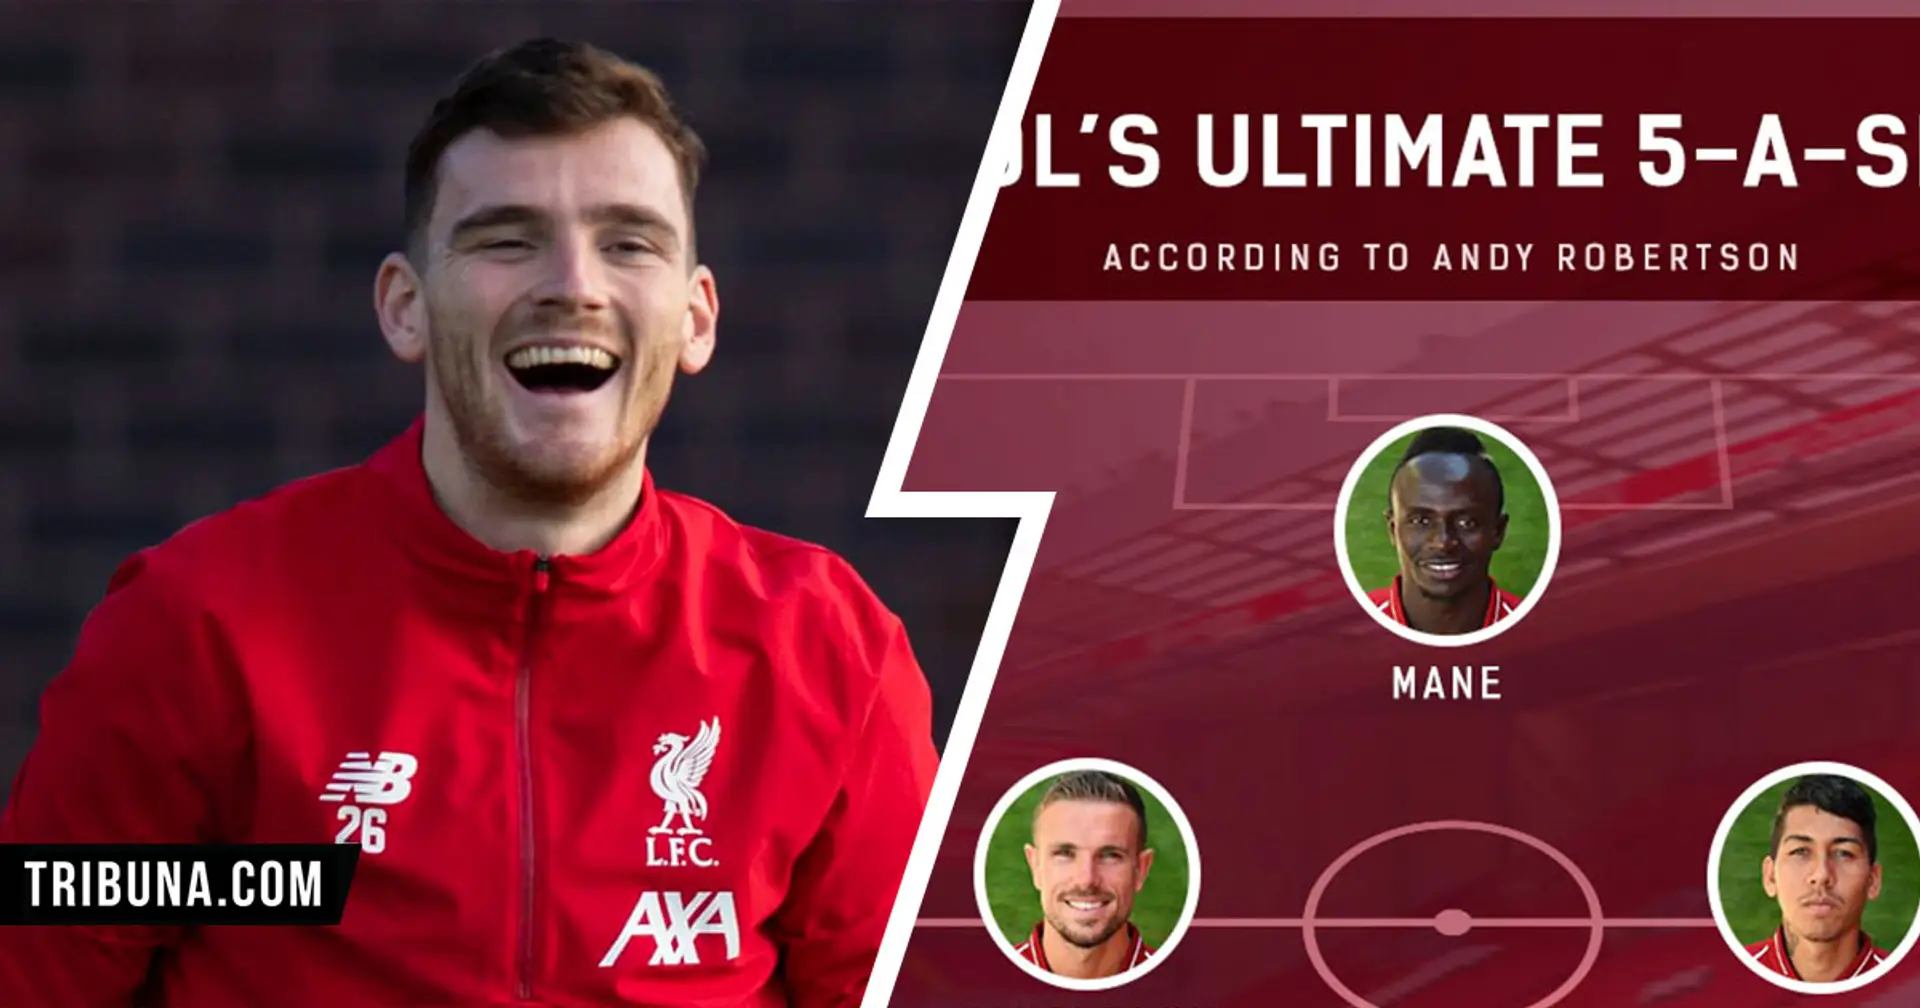 'I know it will annoy Mo Salah!': Robbo reveals LFC's ultimate 5-a-side team